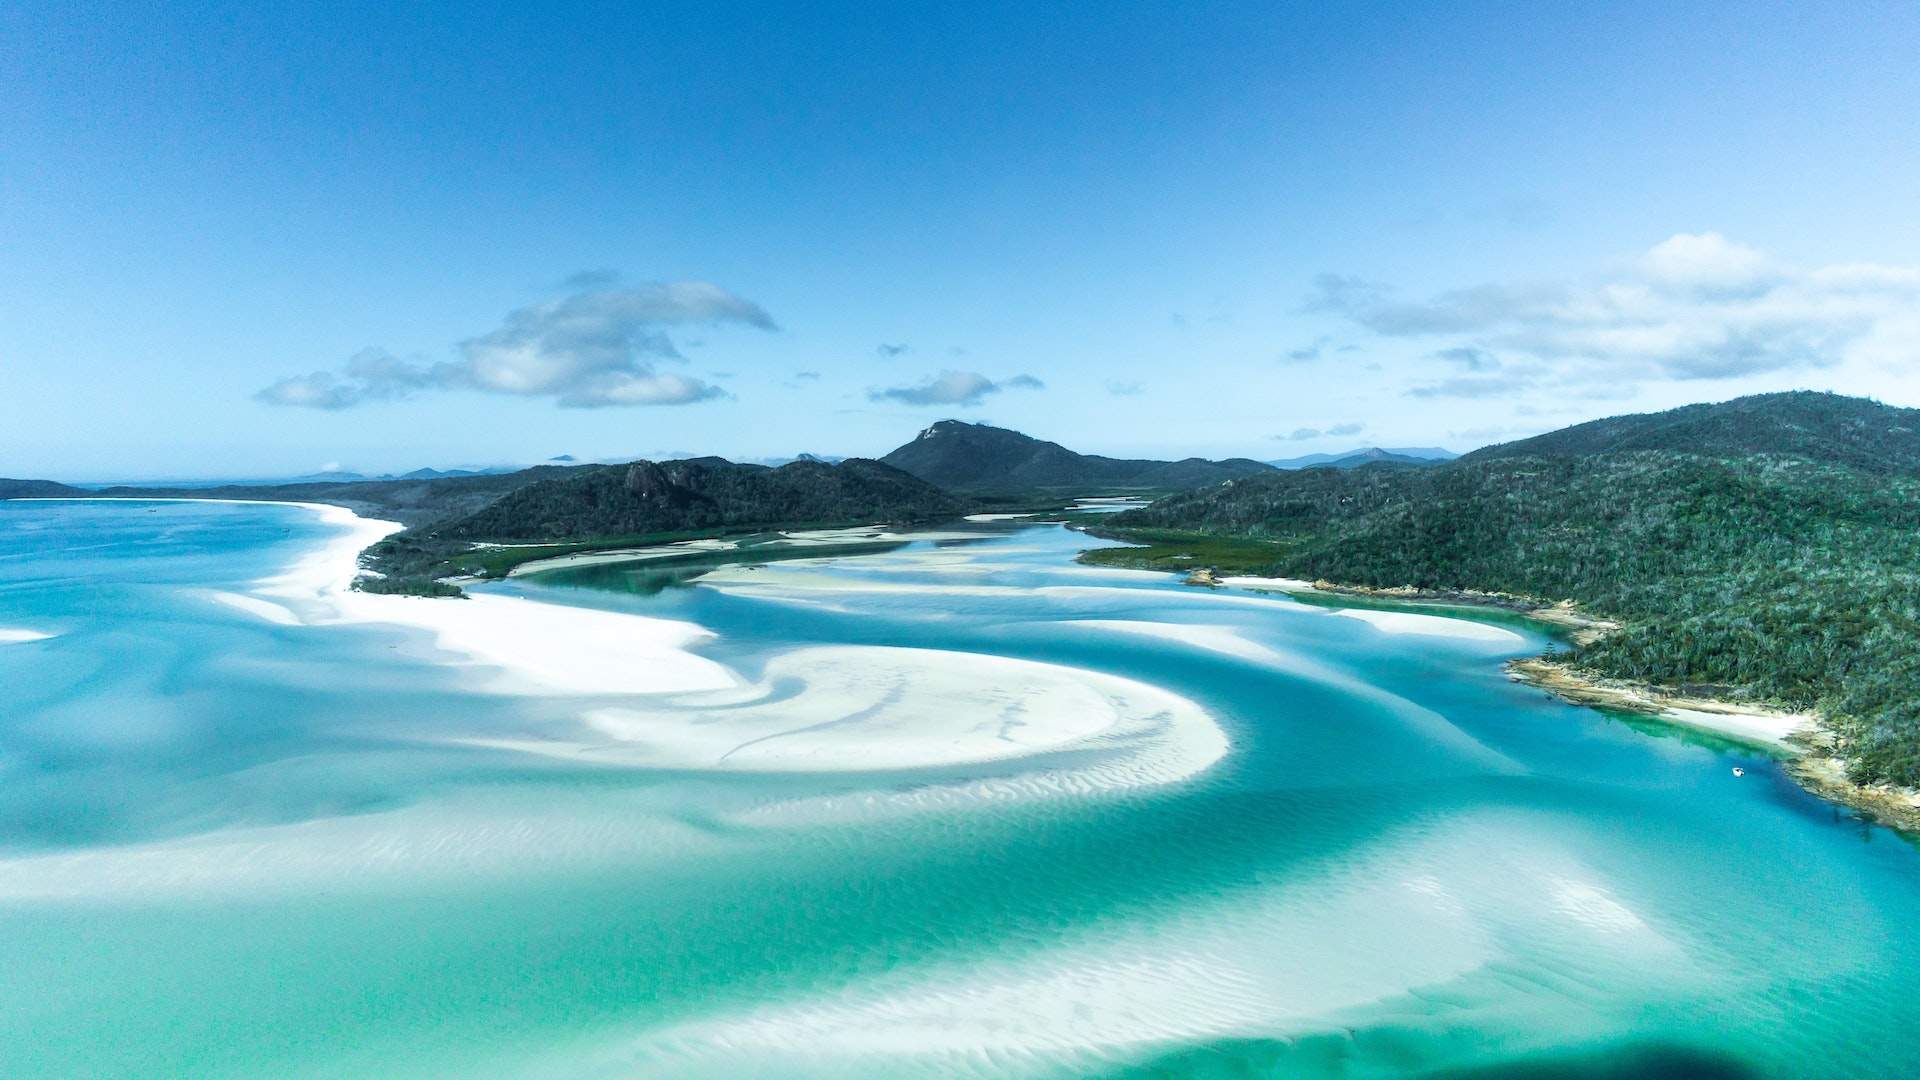 The Whitsundays - home to some of the best islands in Australia.